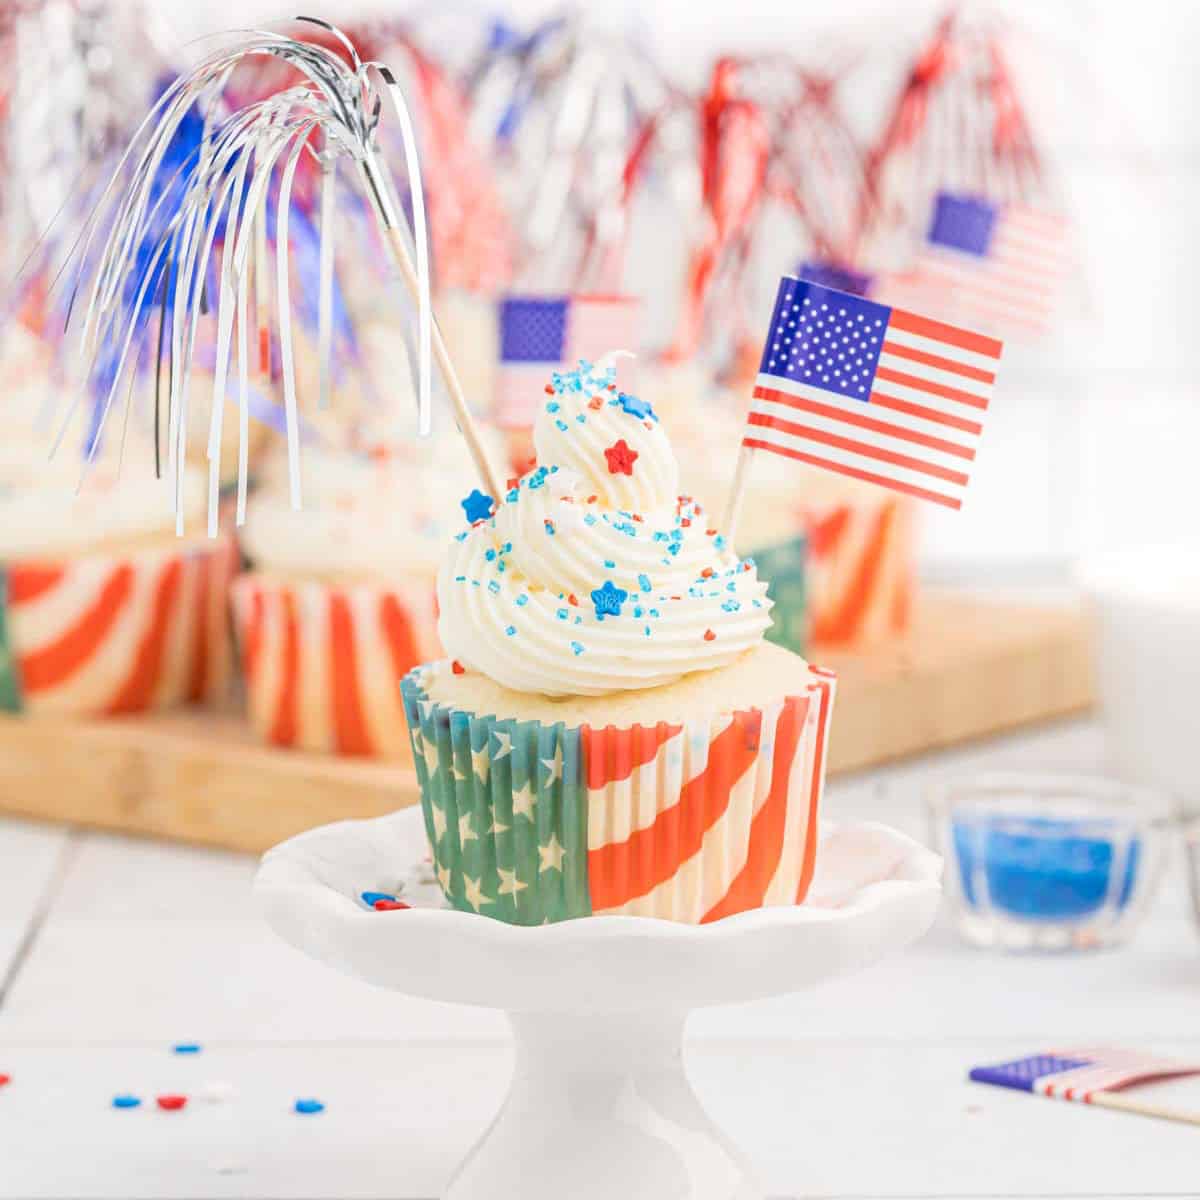 A festive Firecracker Cupcake topped with vanilla frosting, blue and red sprinkles, a small American flag, and a silver fringe decoration. The cupcake liner features a stars and stripes design. In the background, more similarly decorated cupcakes are visible.